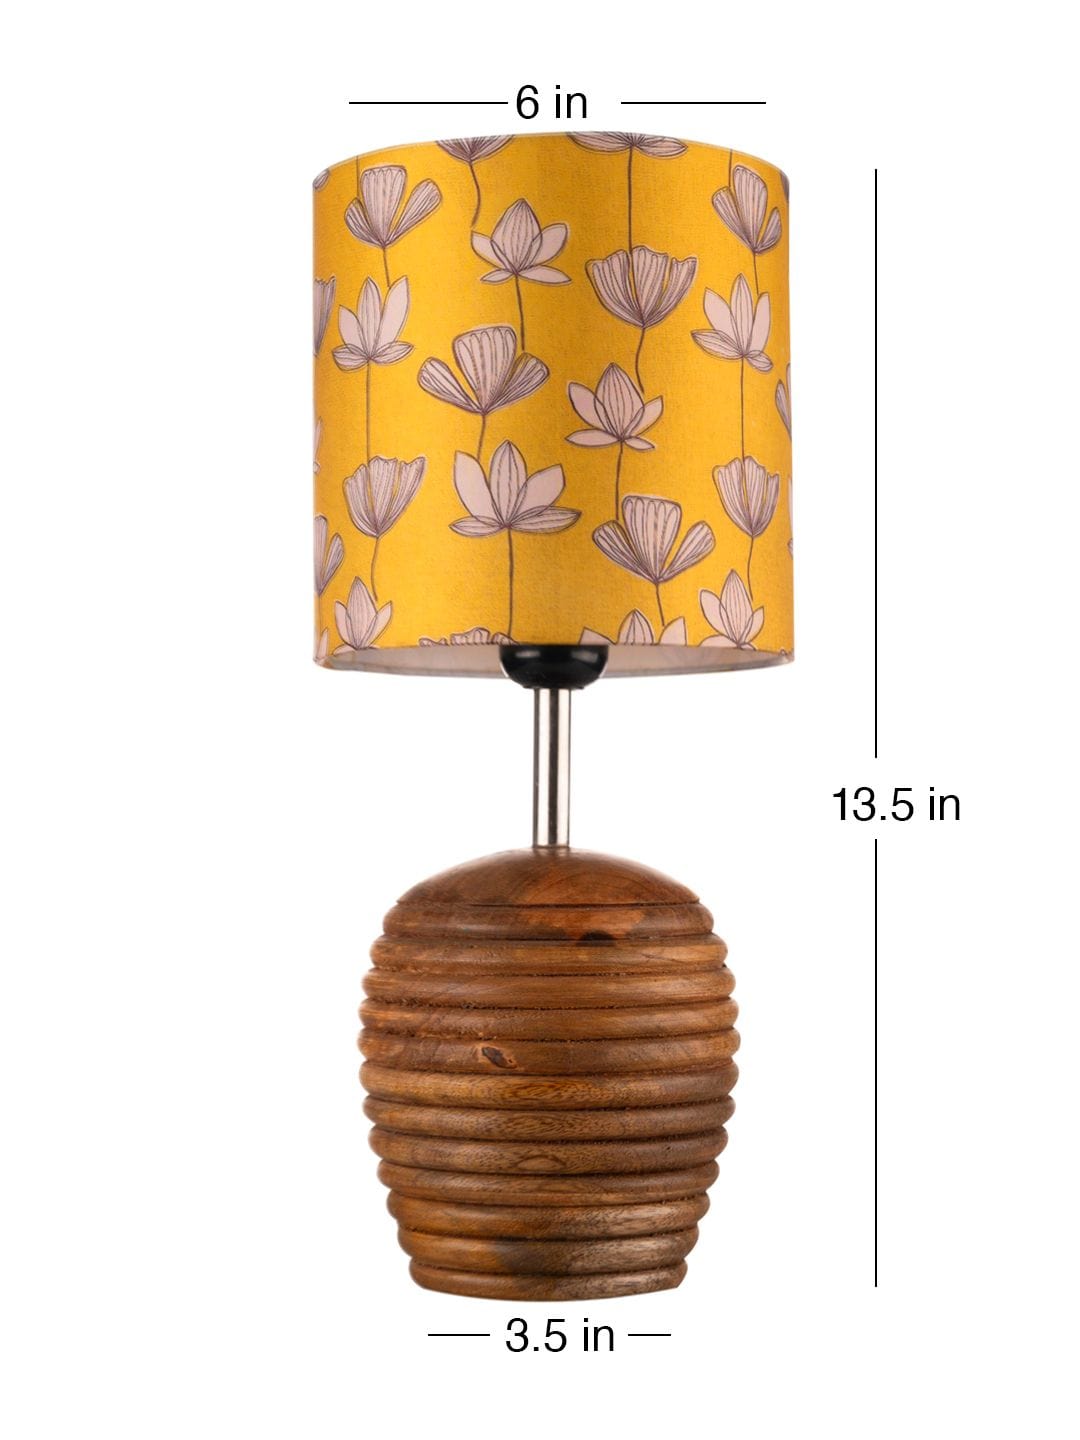 Stripped Brown Lamp with Mustard Flora multicolor shade